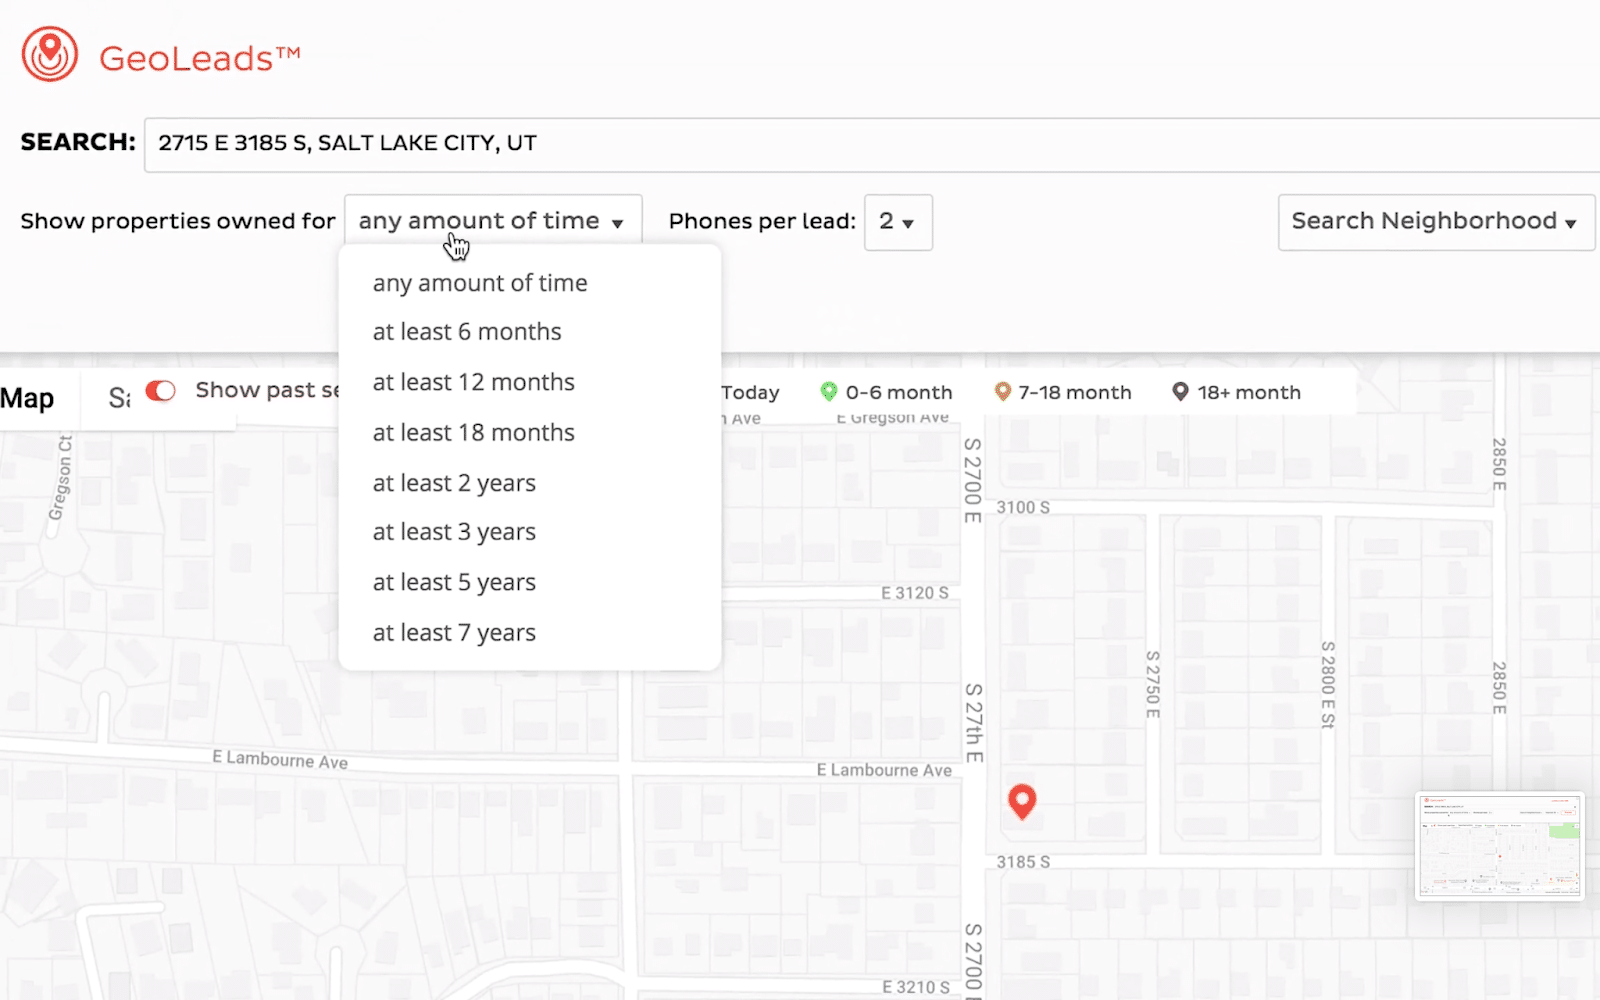 Geoleads property search filter